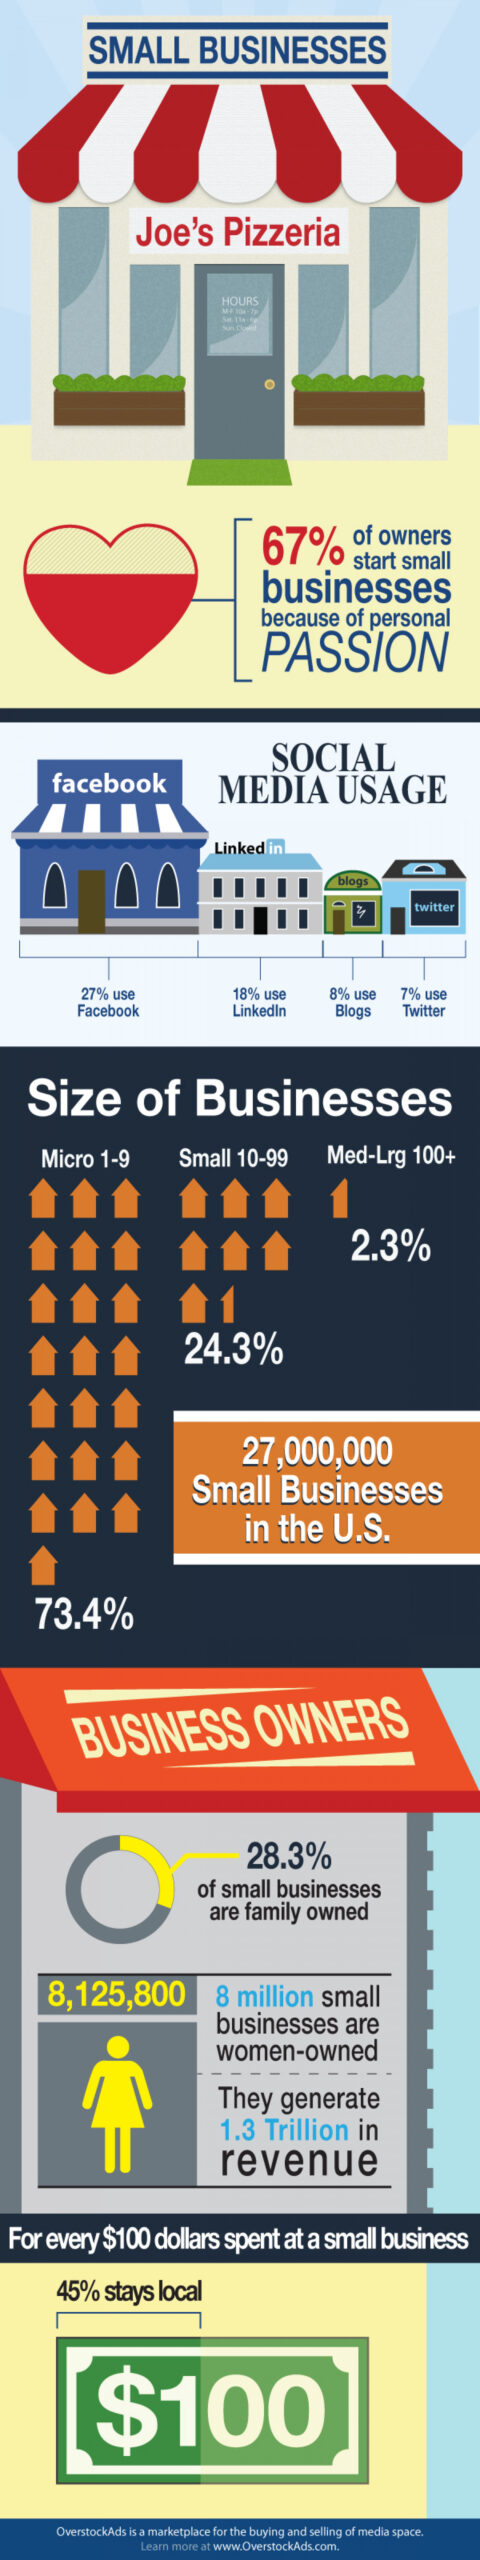 Small Businesses and Growth #infographic | Small business infographic, Business infographic ...